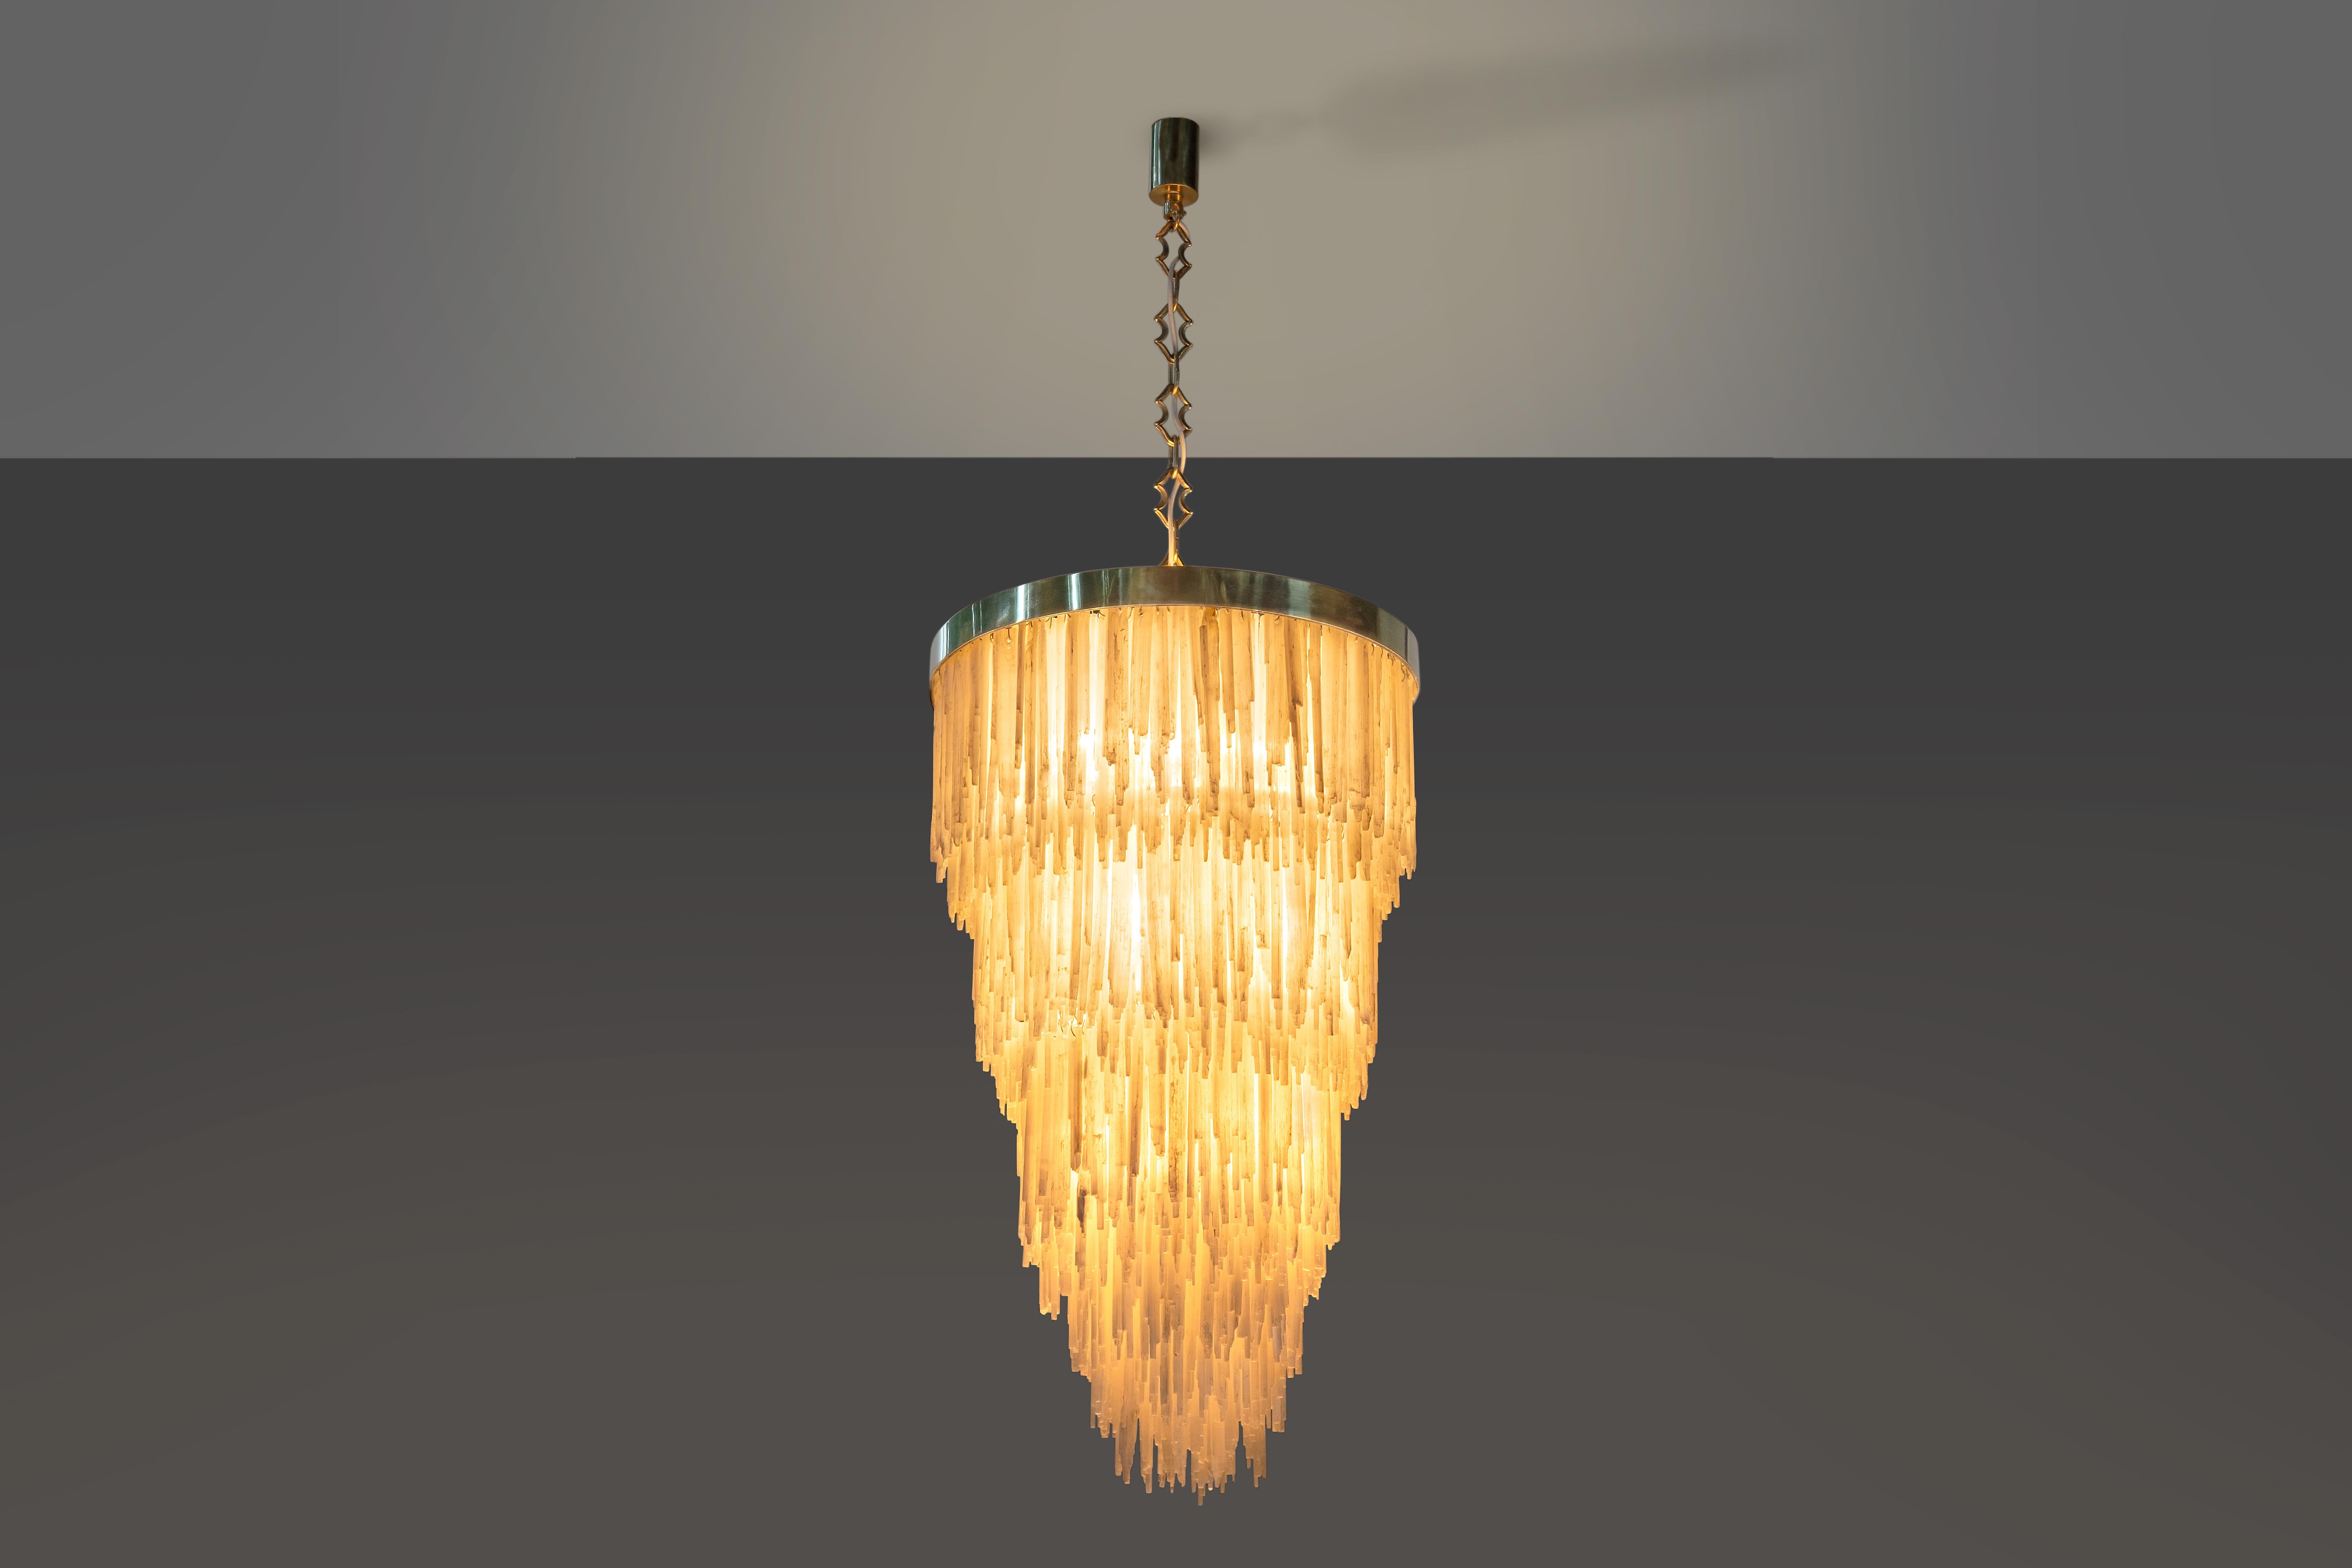 This chandelier shows how even stone - perceived as one of the heaviest materials - can convey lightness if correctly designed. Made out of Selenite, often considered a 